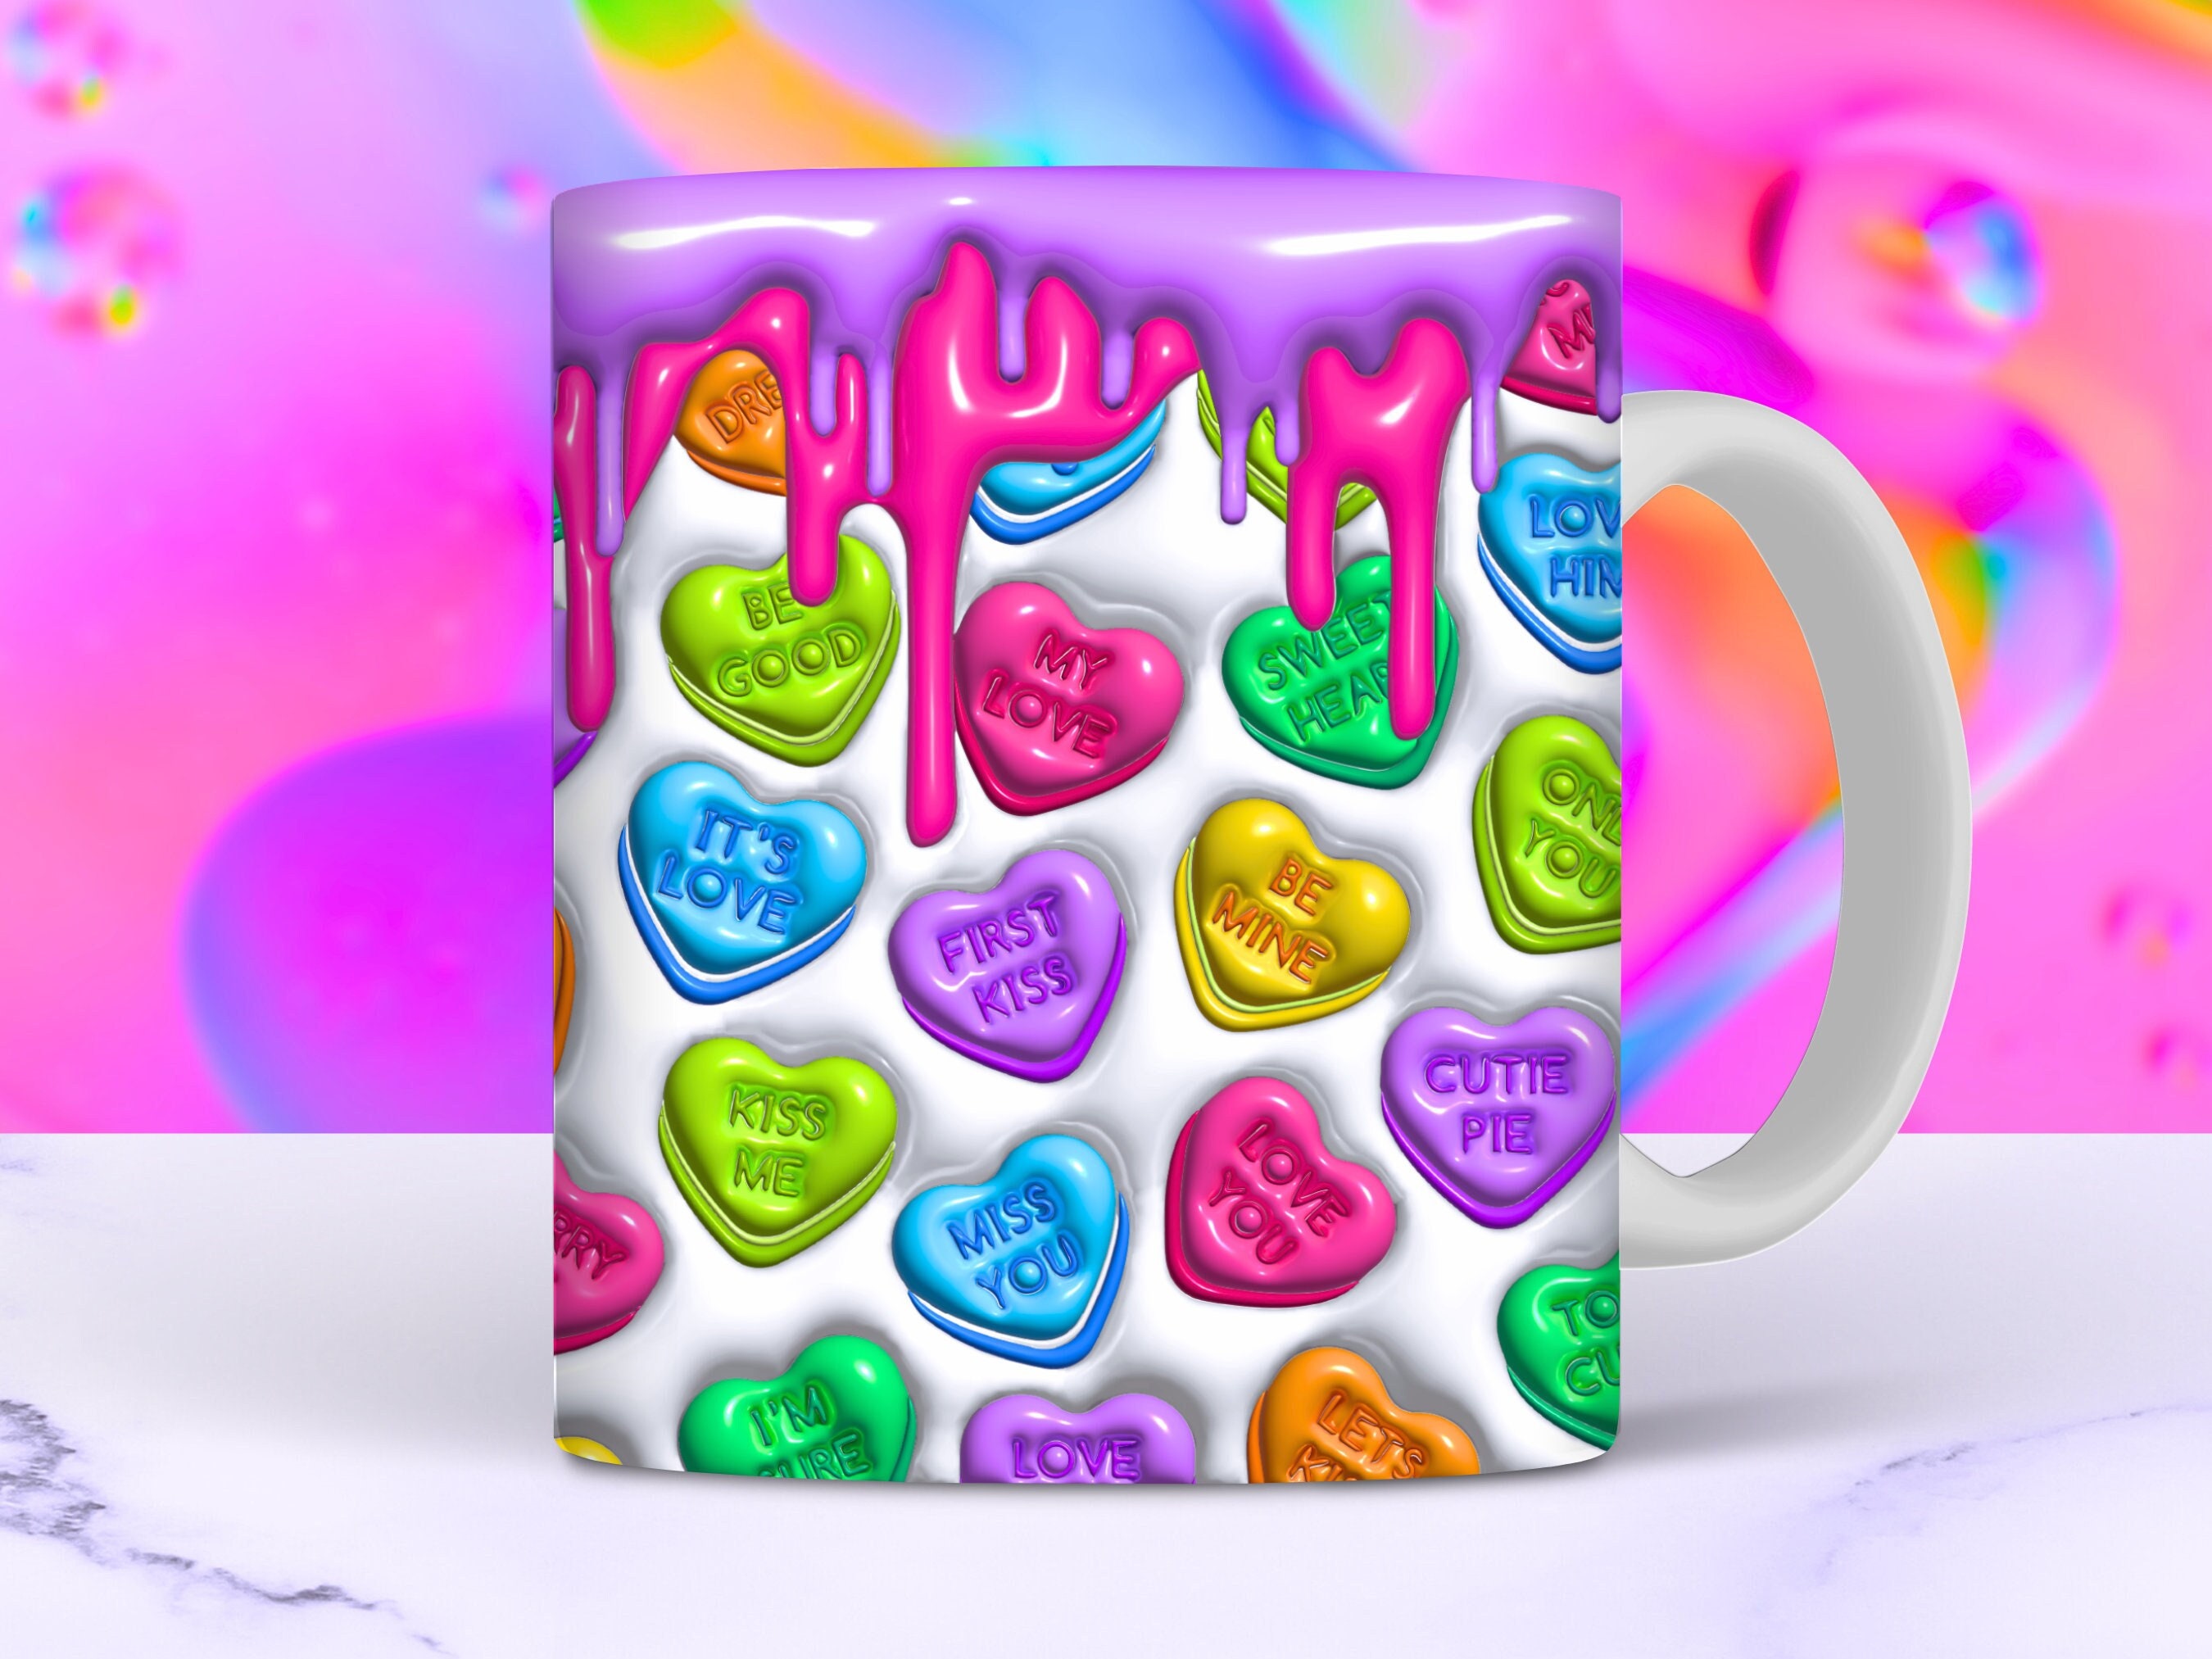 Limited Edition Scripture Candy Hearts Valentine Mug